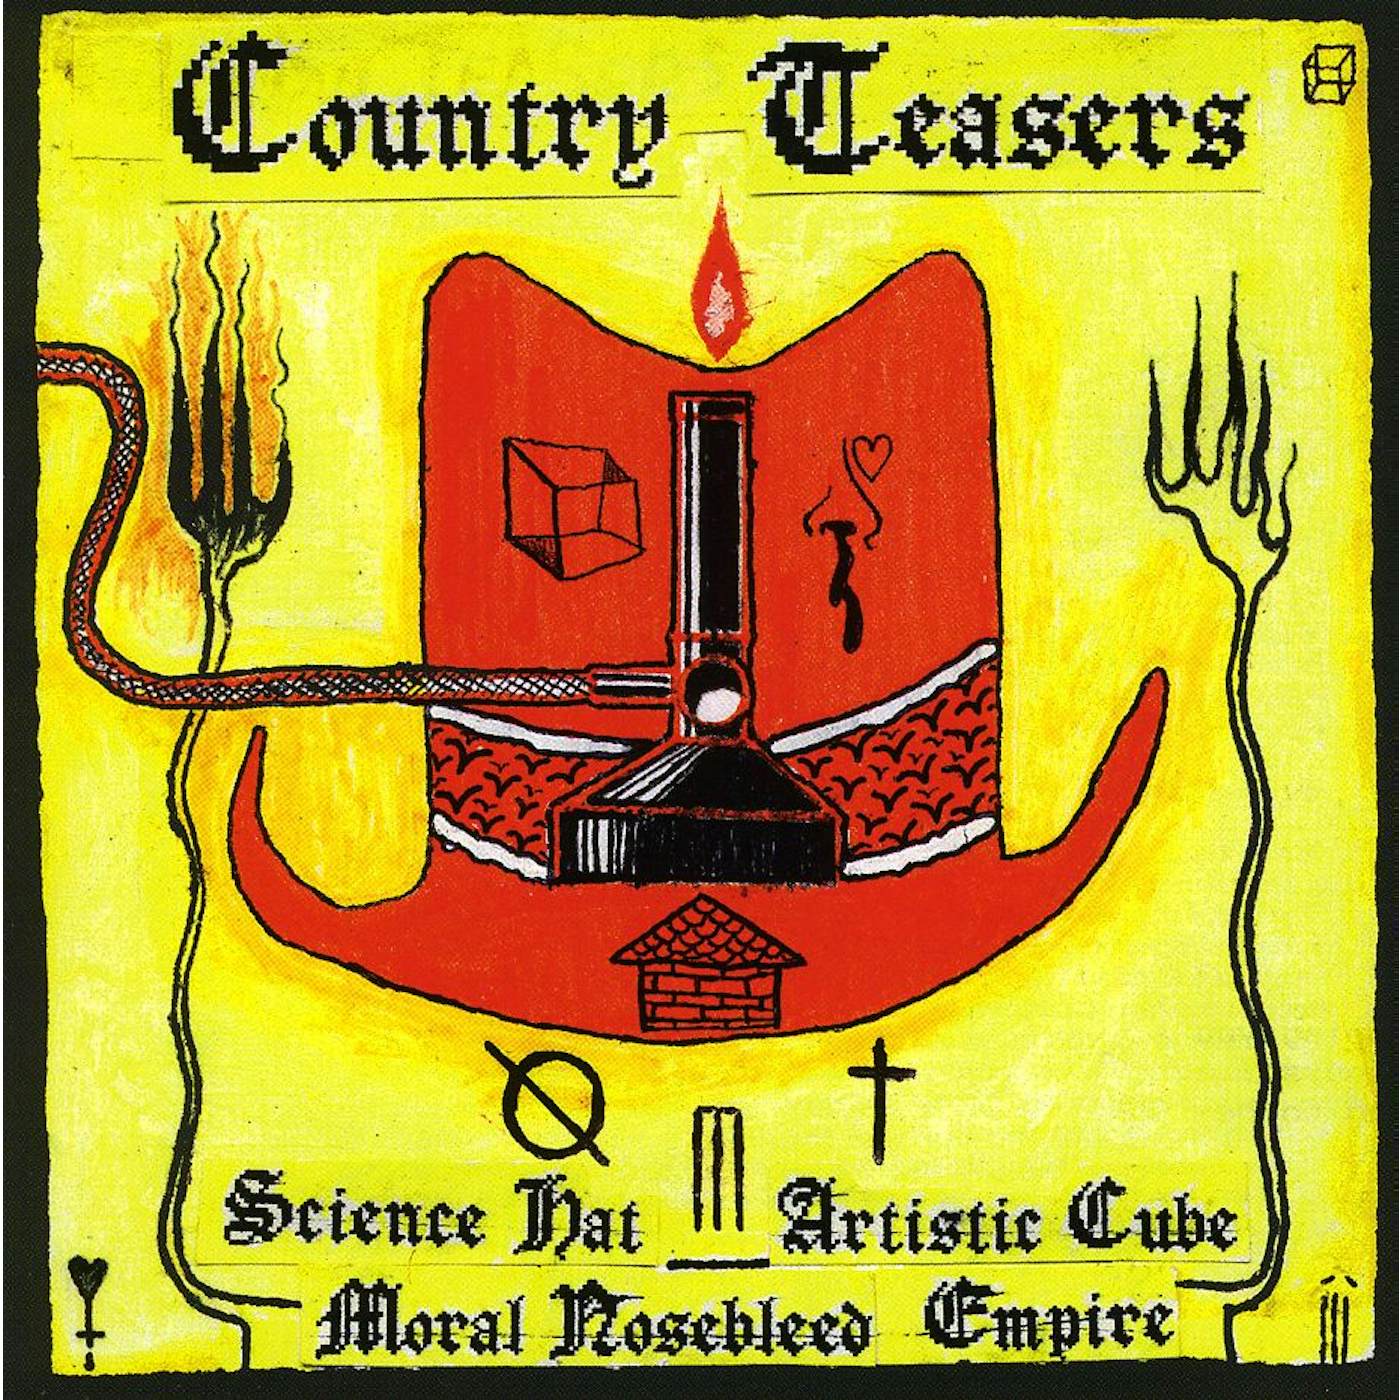 Country Teasers SCIENCE HAT ARTISTIC CUBE MORAL NOSEBLEED EMPIRE CD